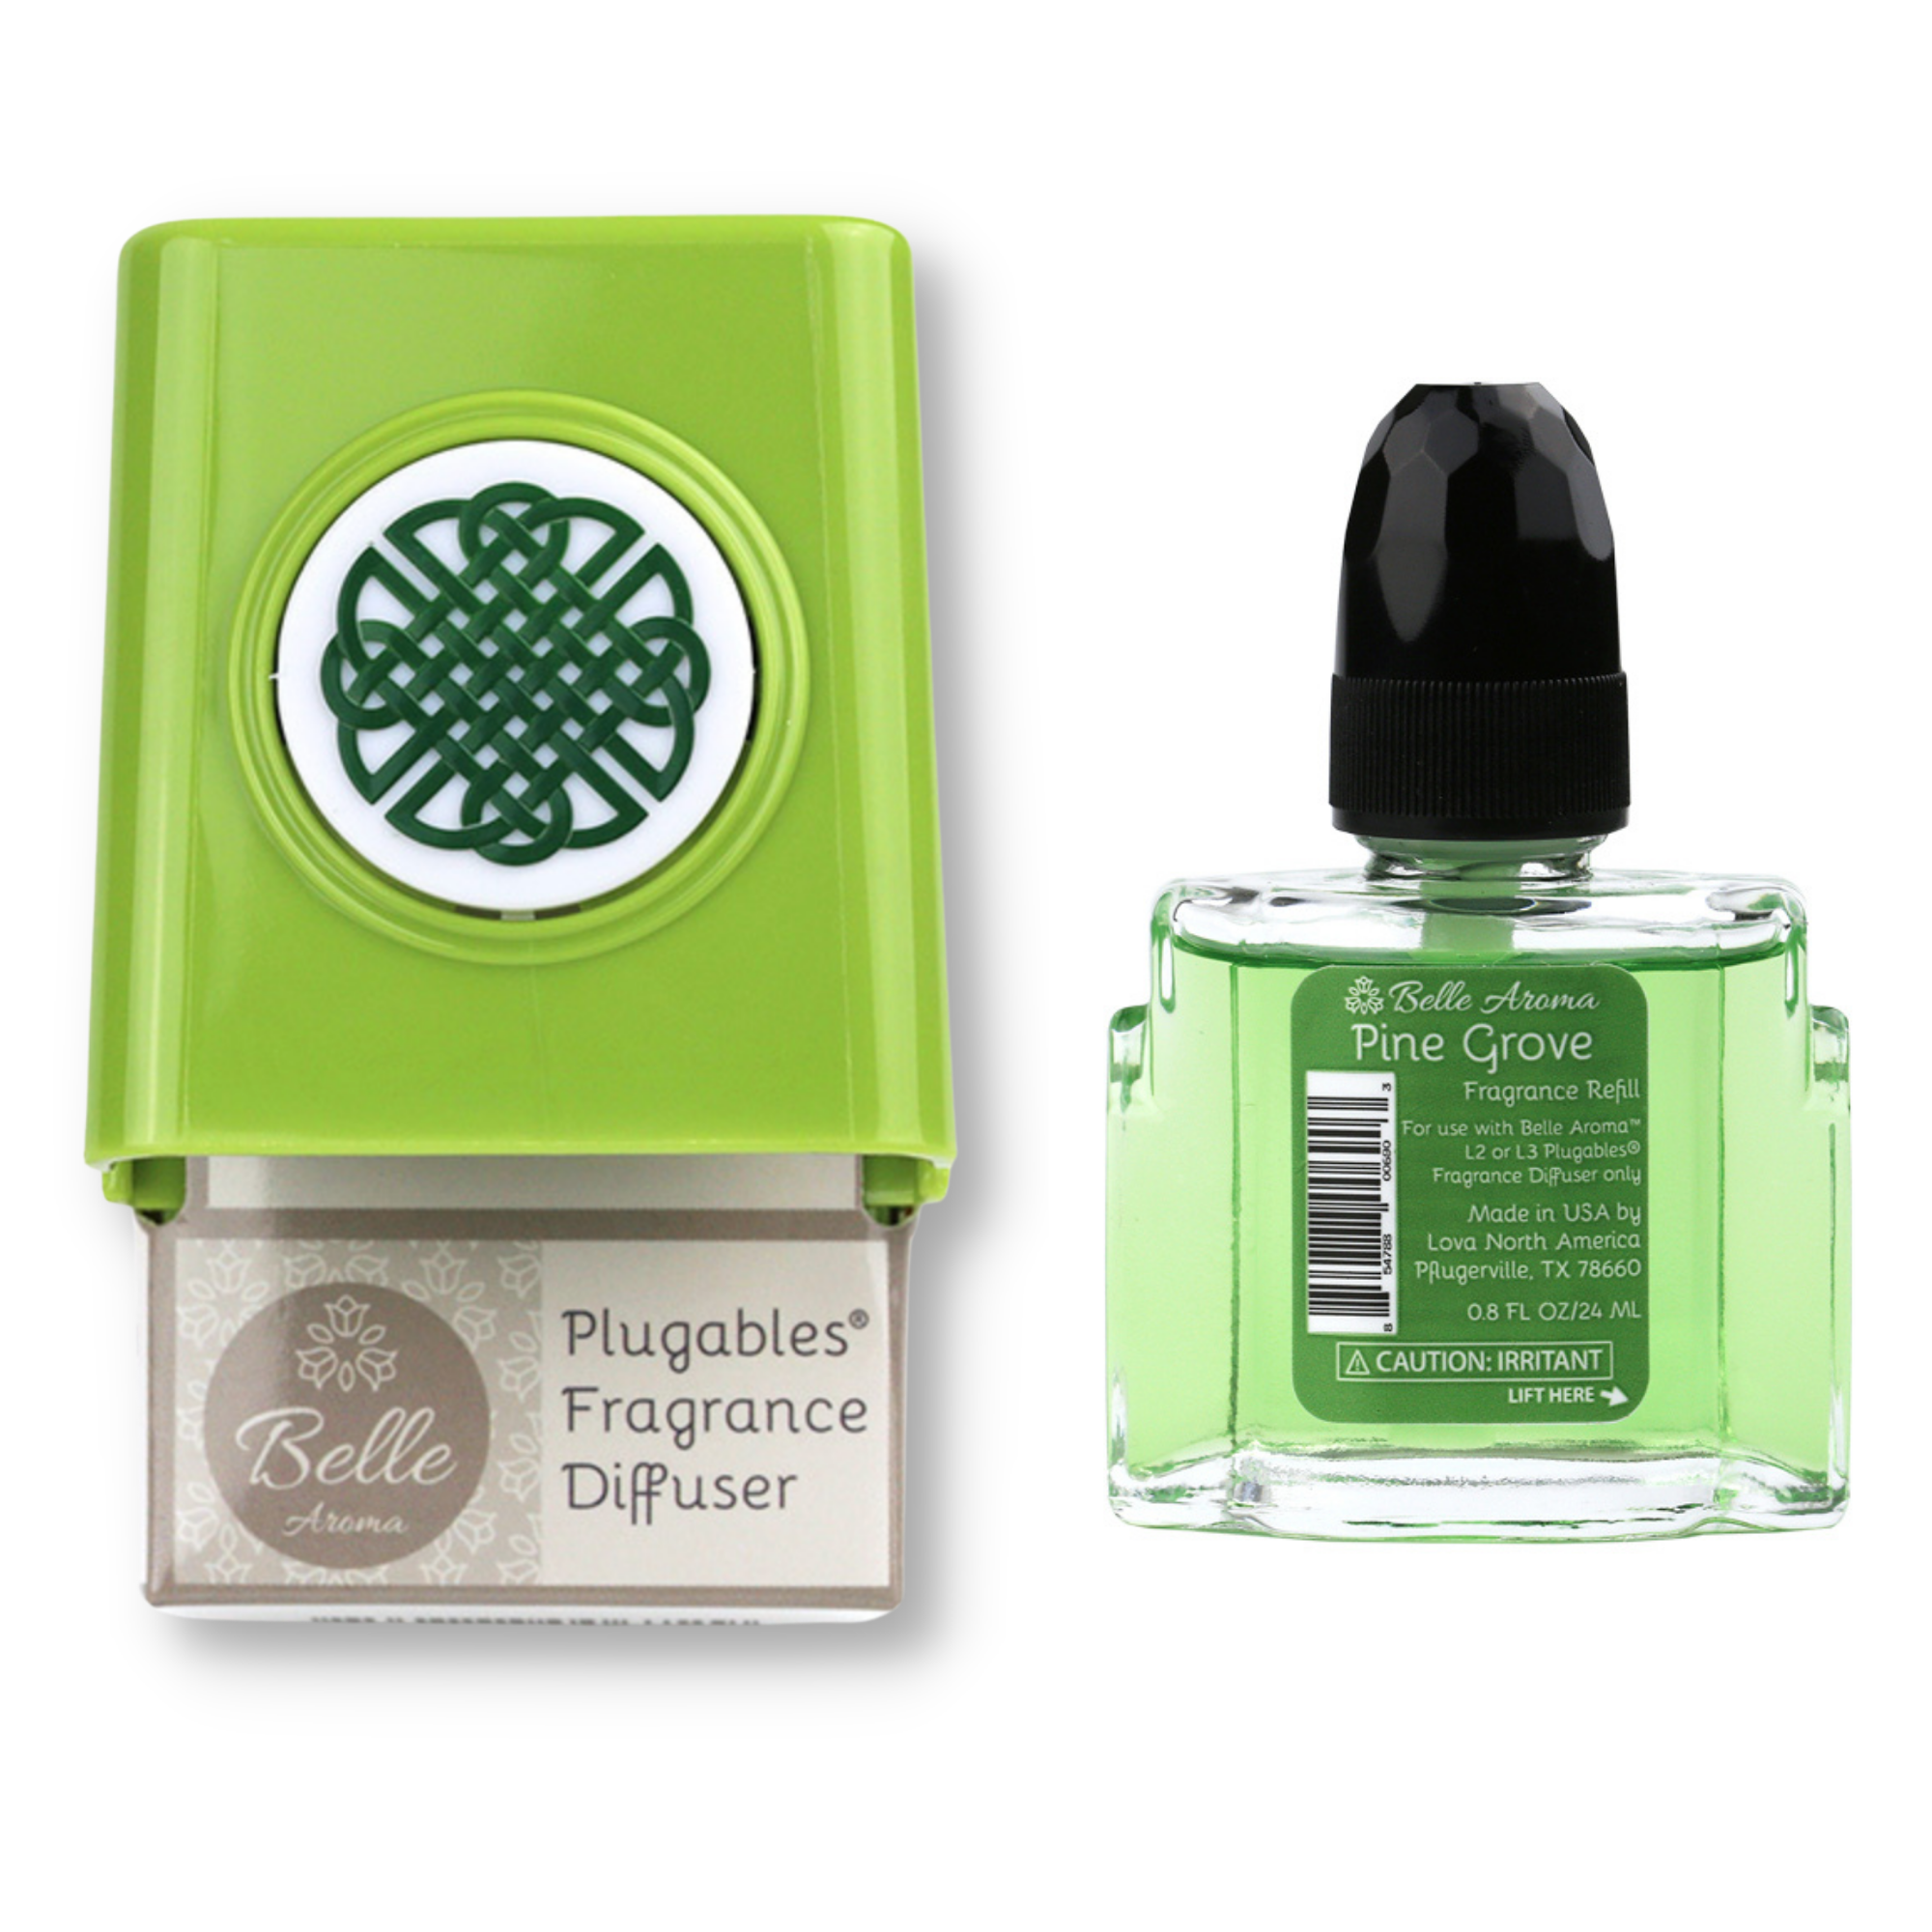 Celtic Knot Medallion Plugables® Plugin Aromalectric® Scented Oil Diffuser - Granny Smith with Pine Grove Fragrance Oil Home Fragrance Accessories